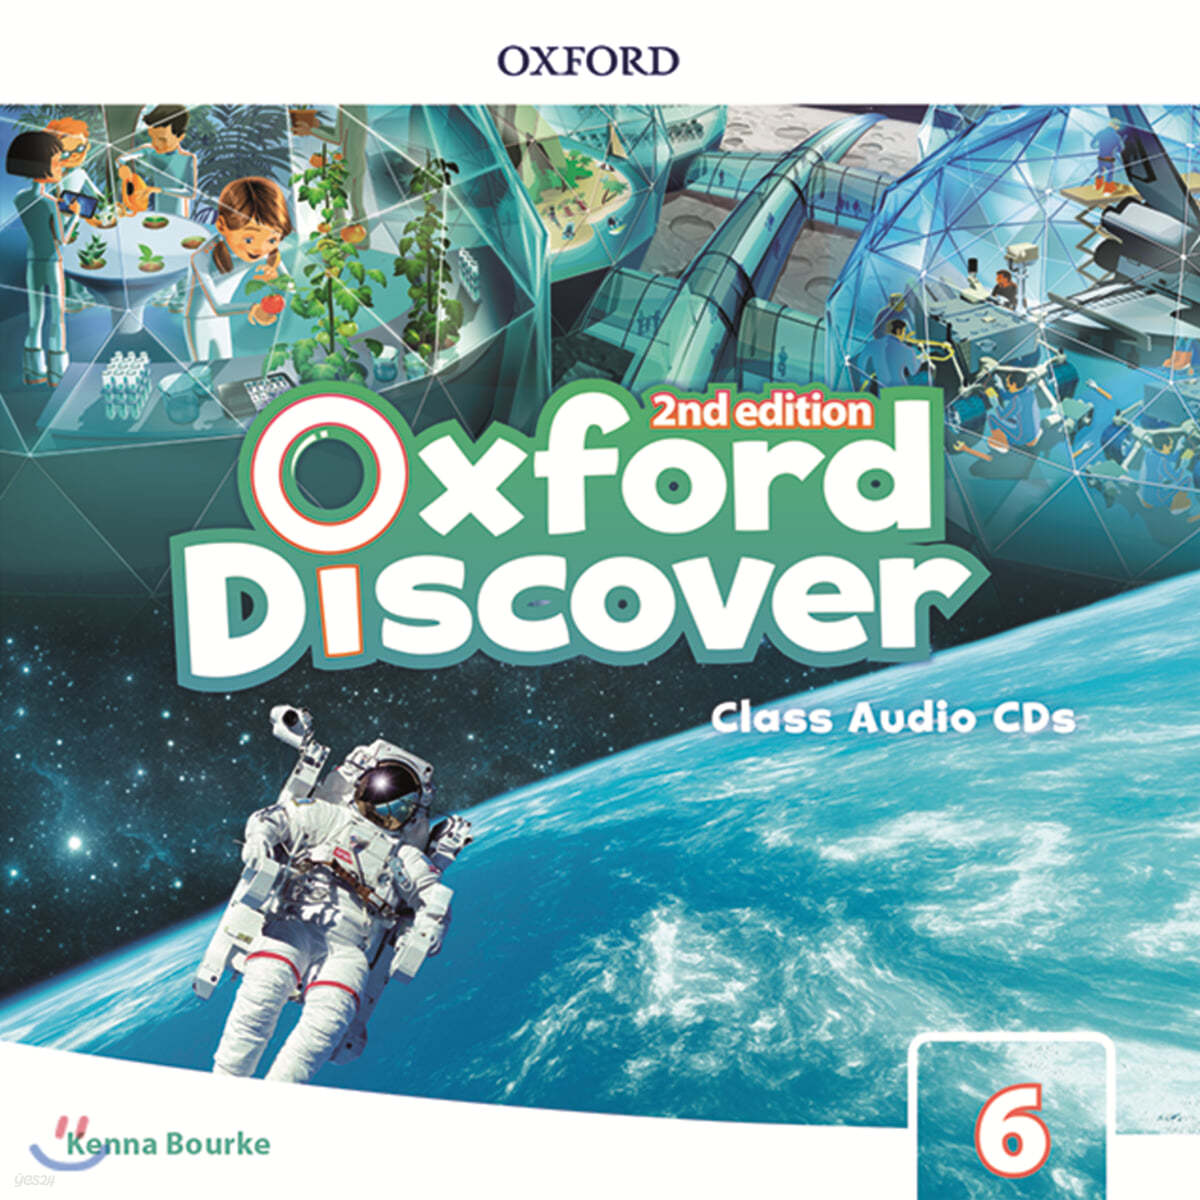 Level　CDs　Audio　Oxford　Class　Discover　예스24